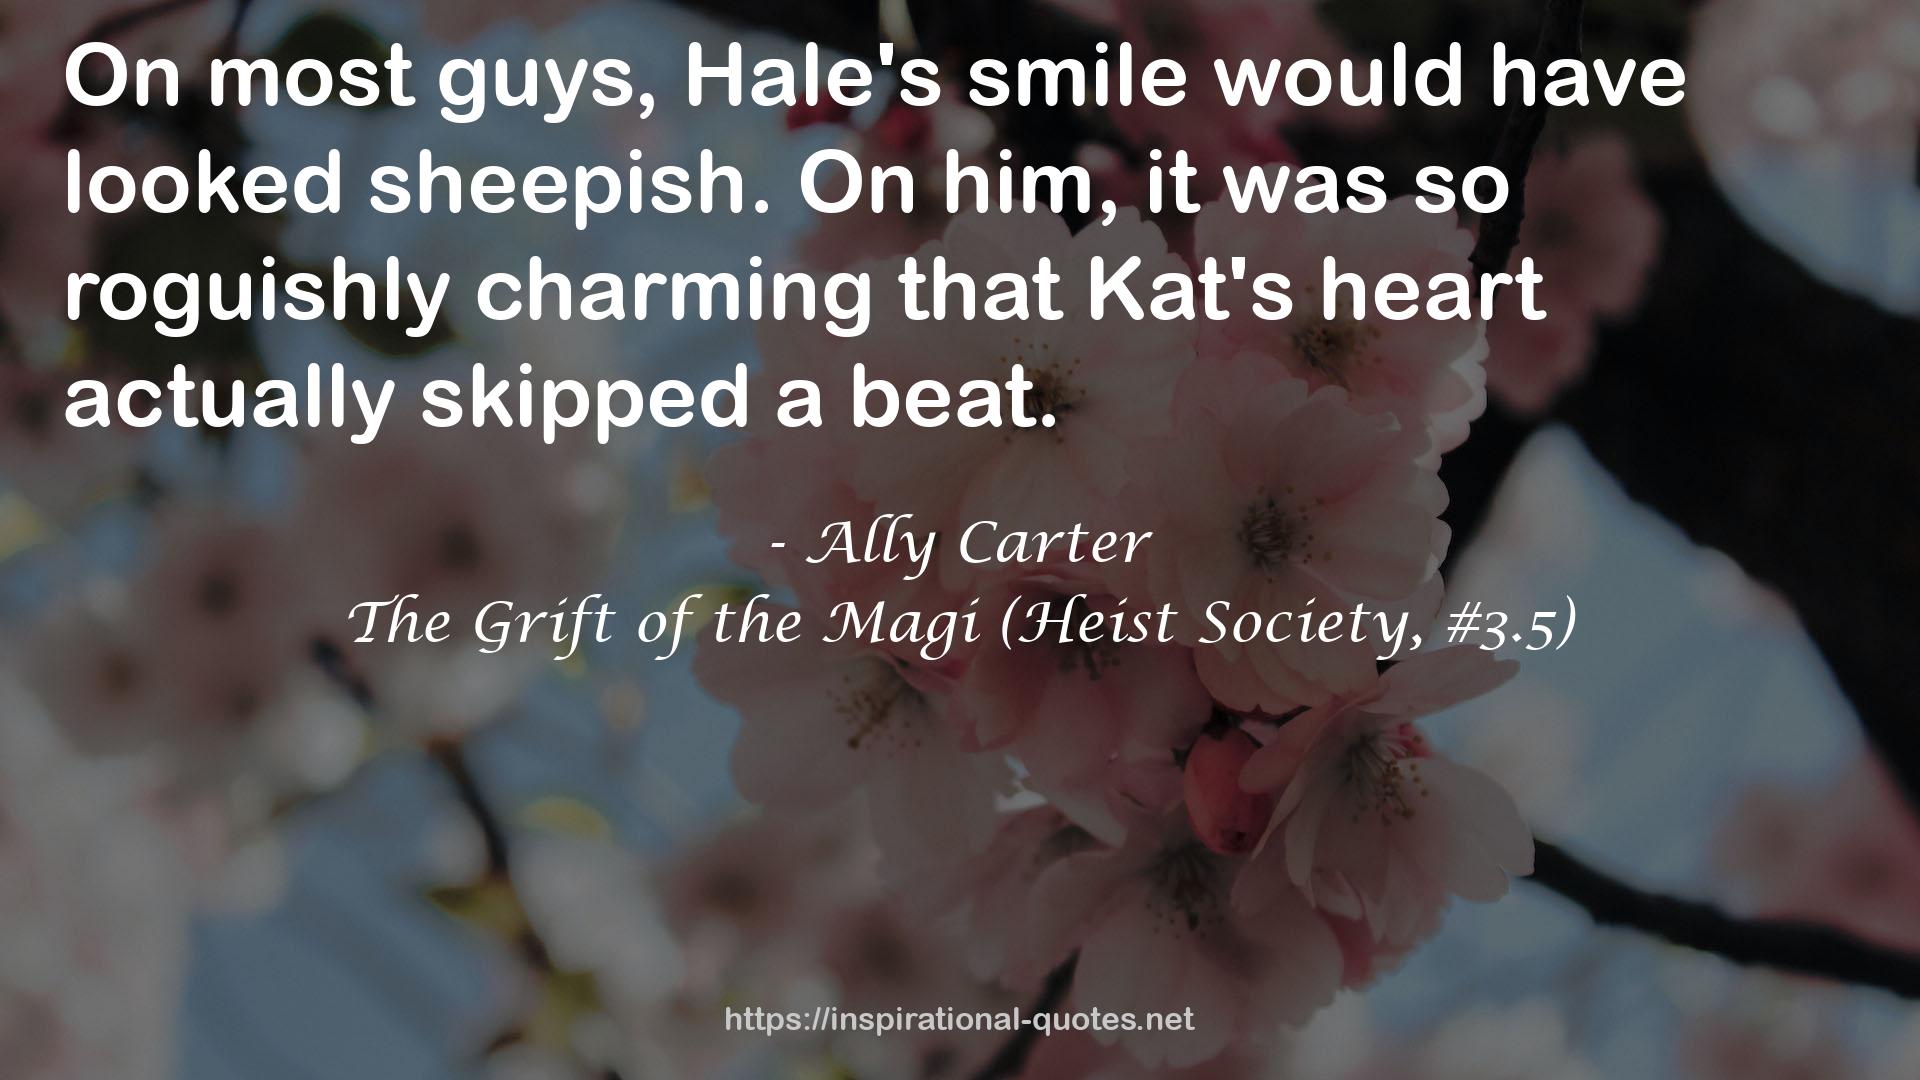 The Grift of the Magi (Heist Society, #3.5) QUOTES